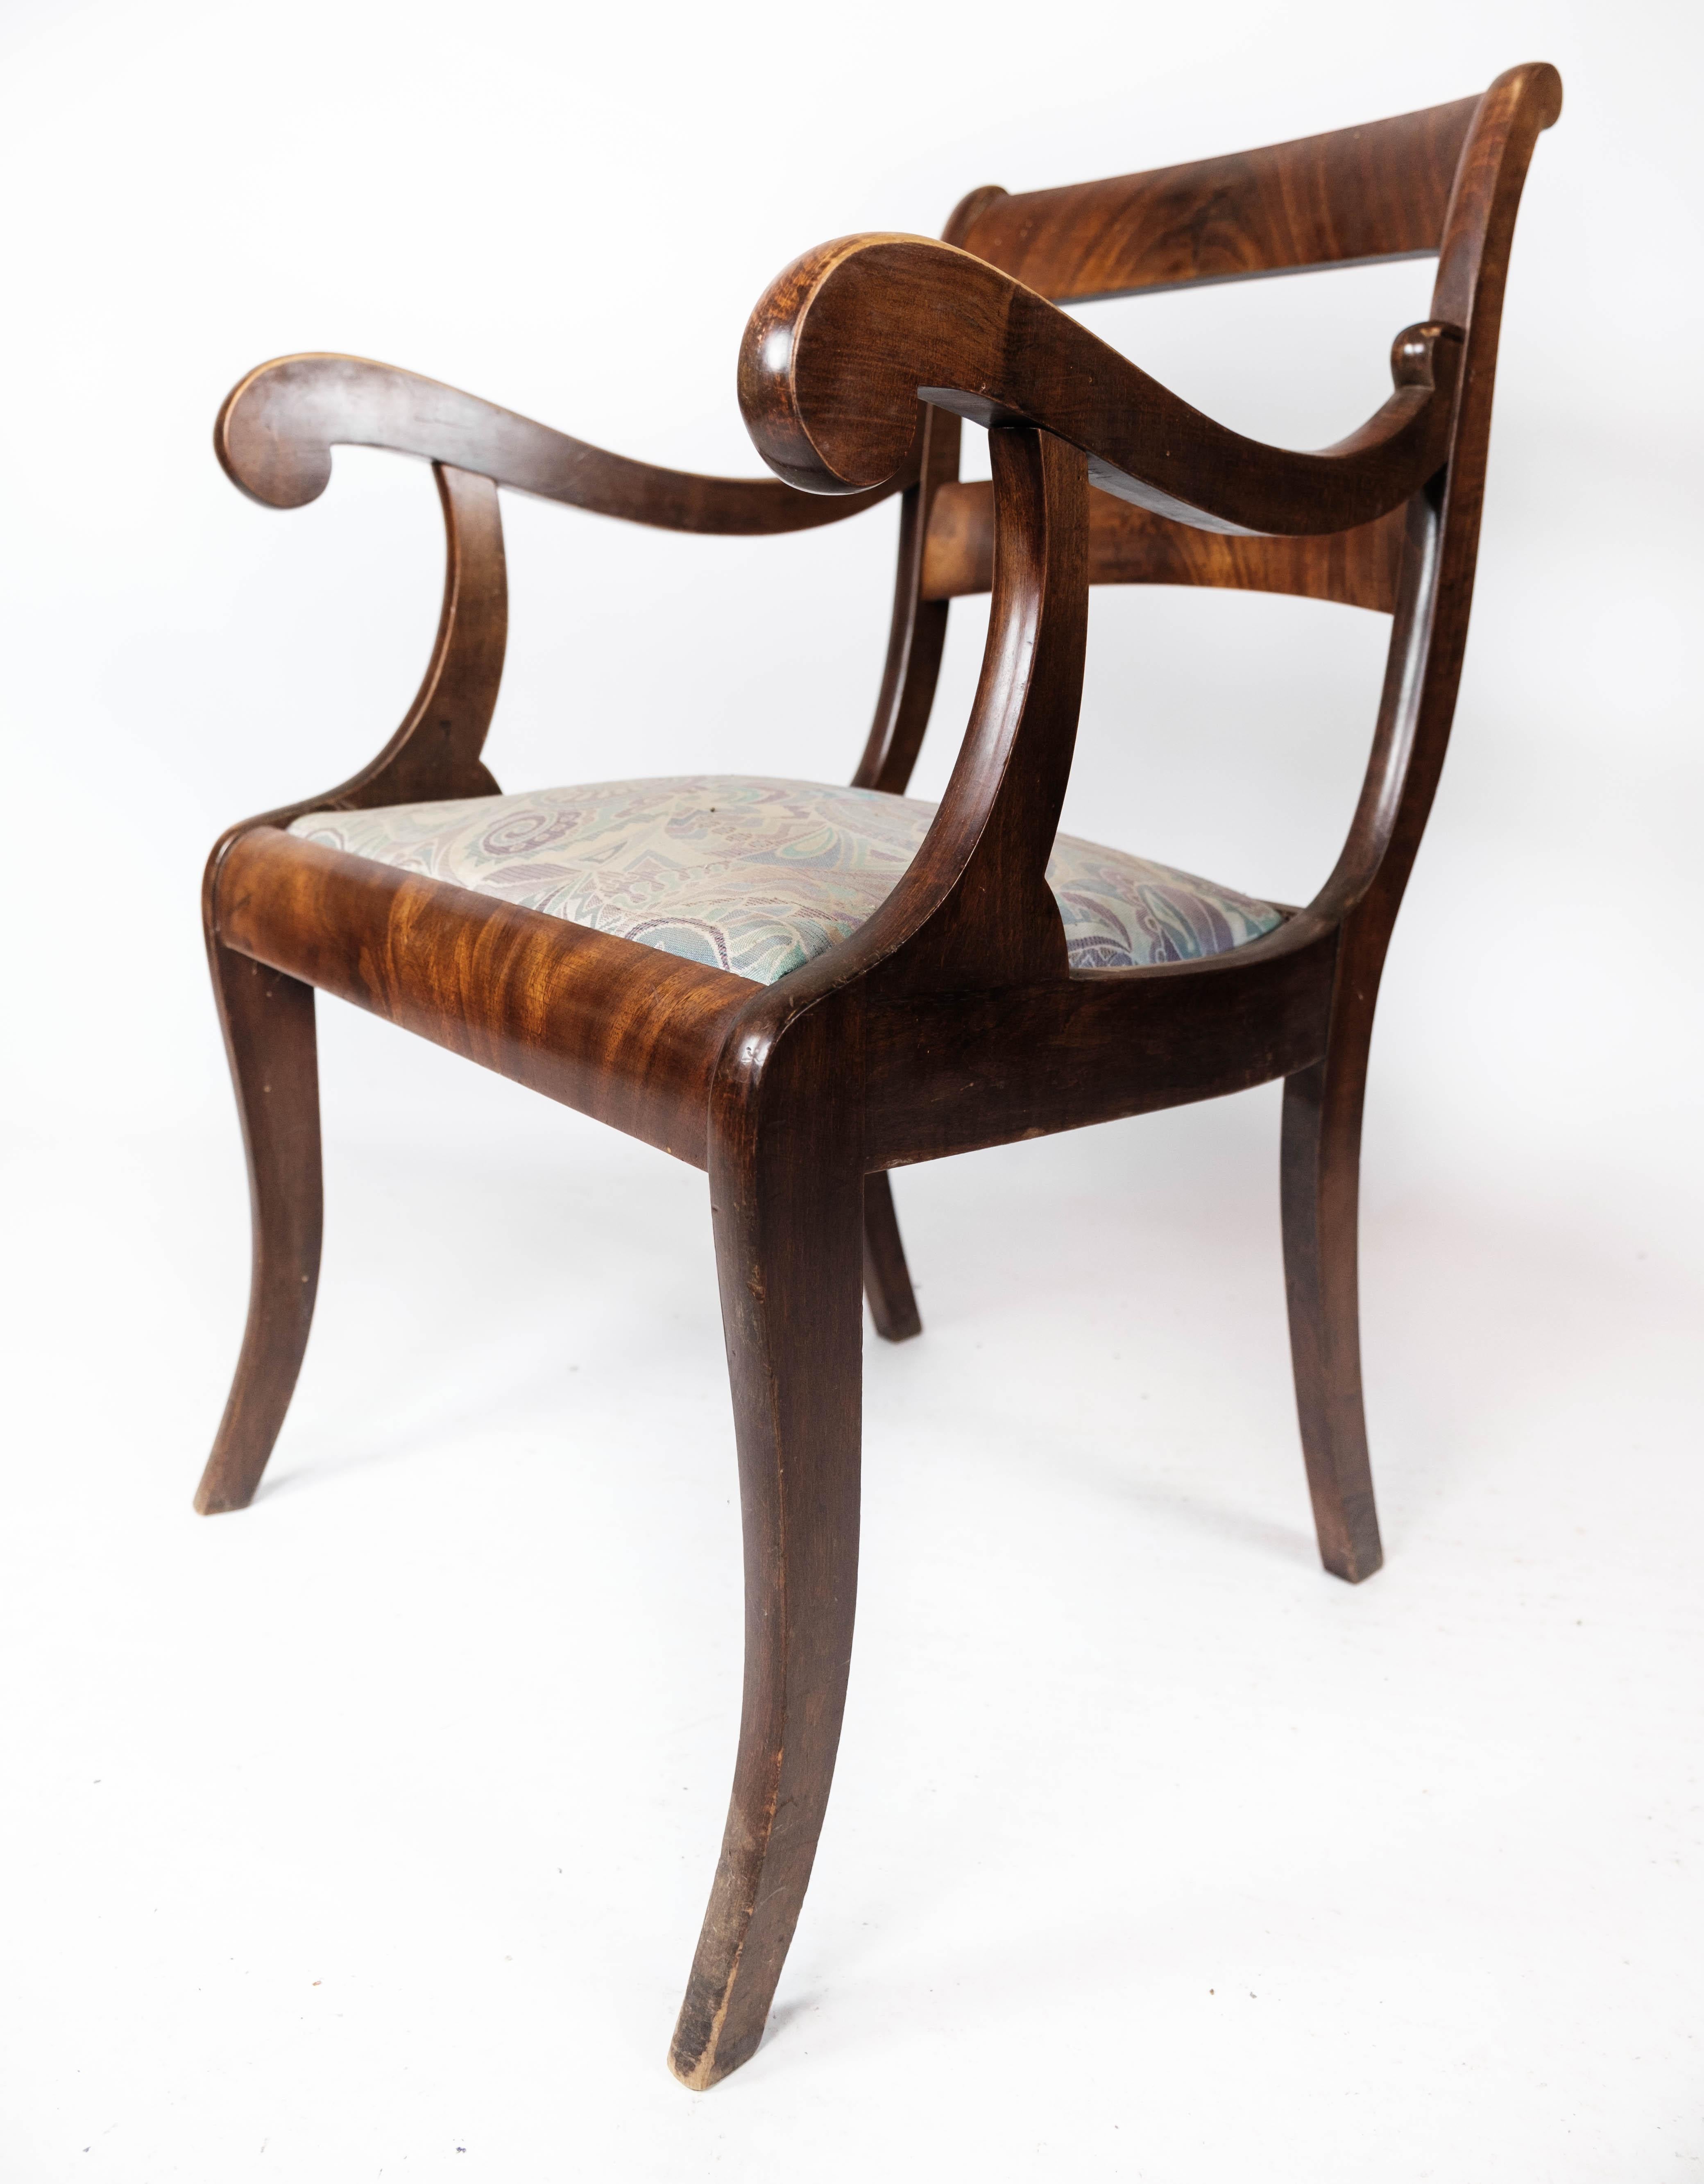 Other A set of two Empire Antique Armchair of Mahogany, 1840s